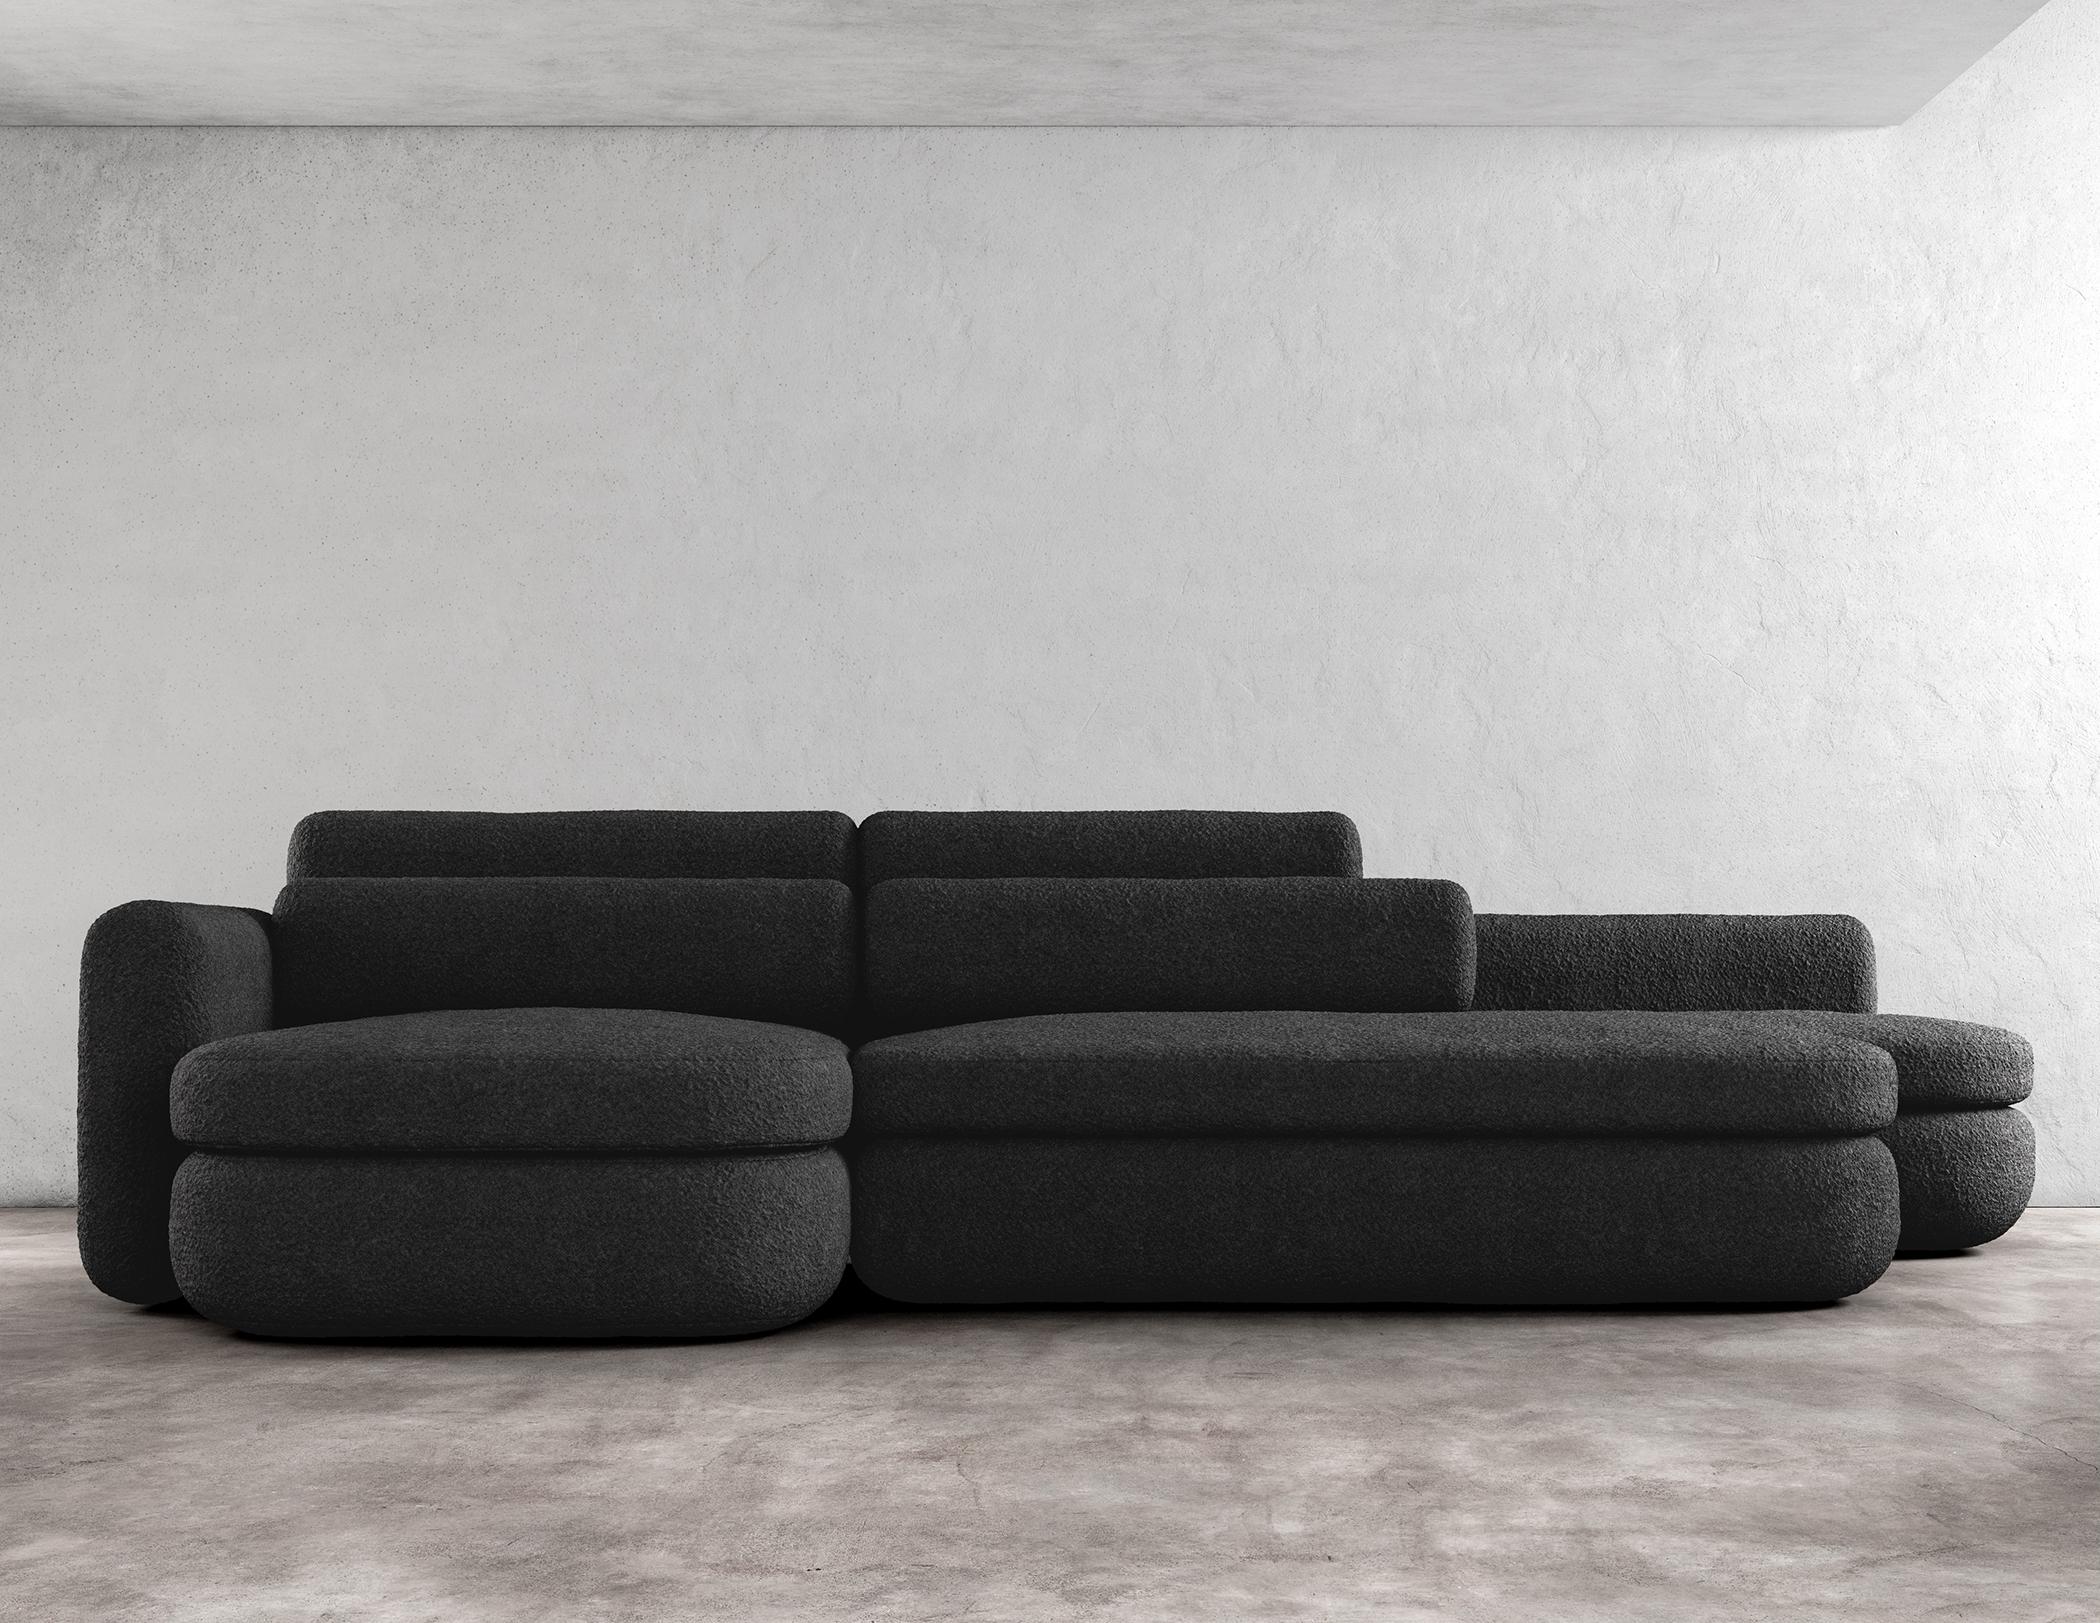 ASYM SECTIONAL - Modern Asymmetrical Sectional Sofa in Black Boucle In New Condition For Sale In Laguna Niguel, CA